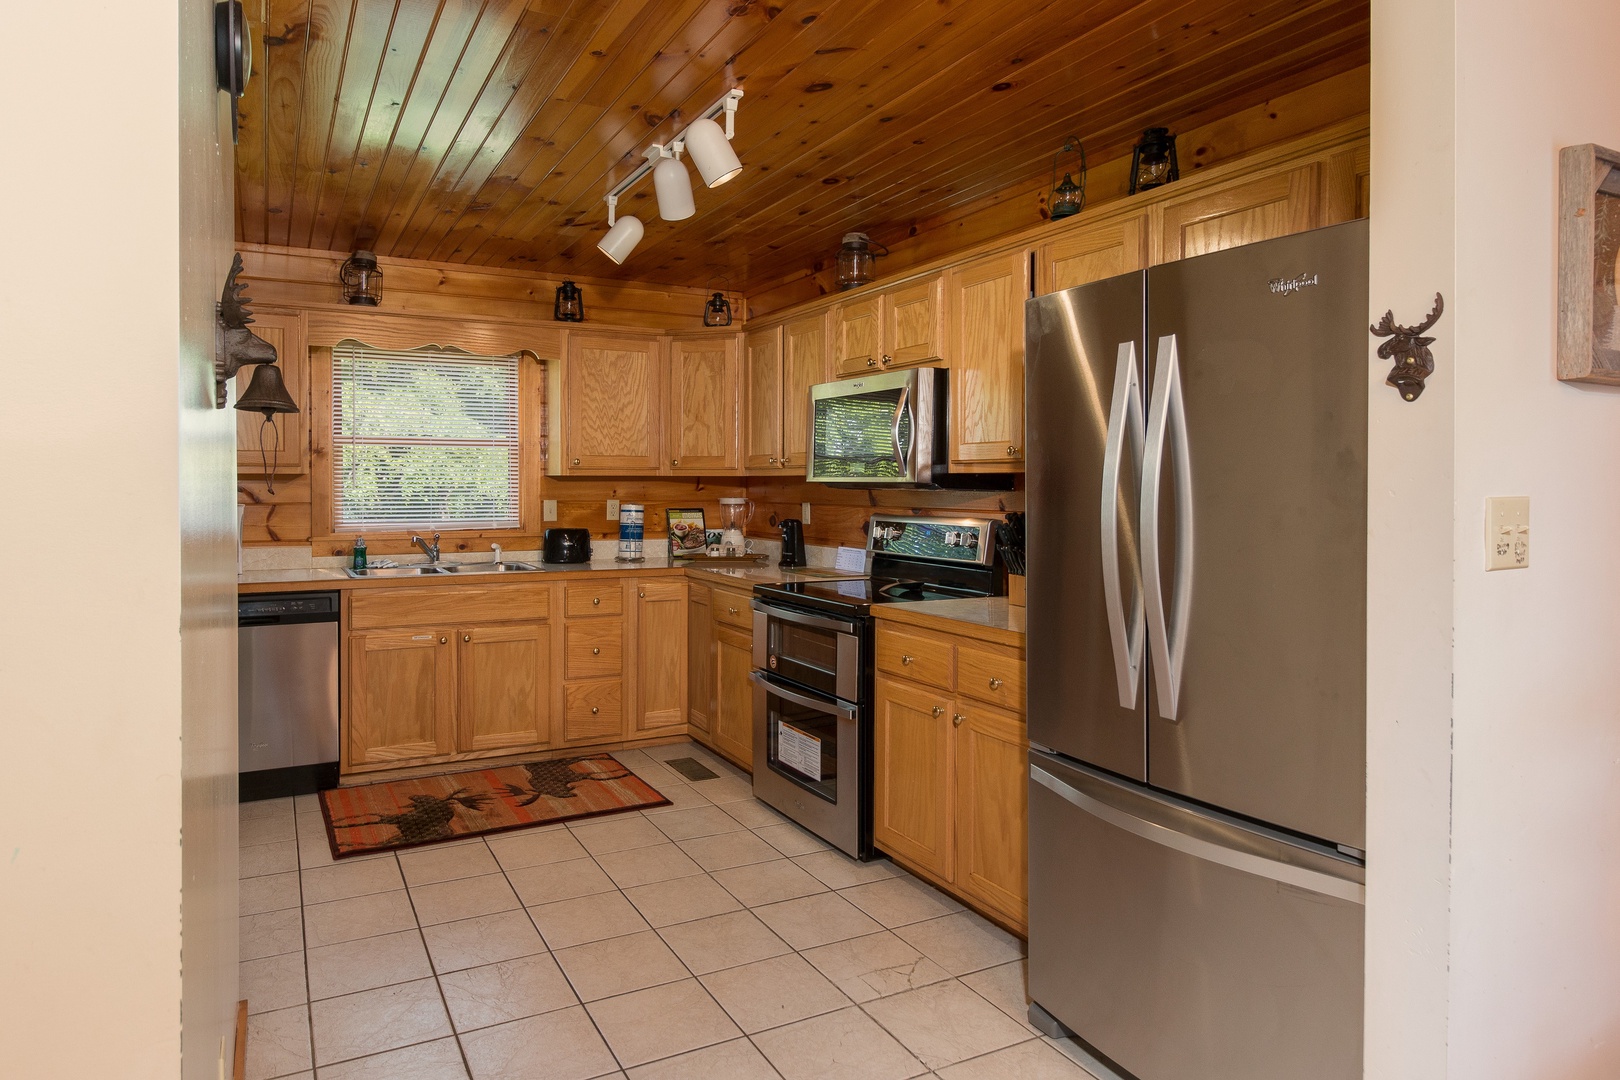 Kitchen with stainless appliances at Moose Lodge, a 4 bedroom cabin rental located in Sevierville